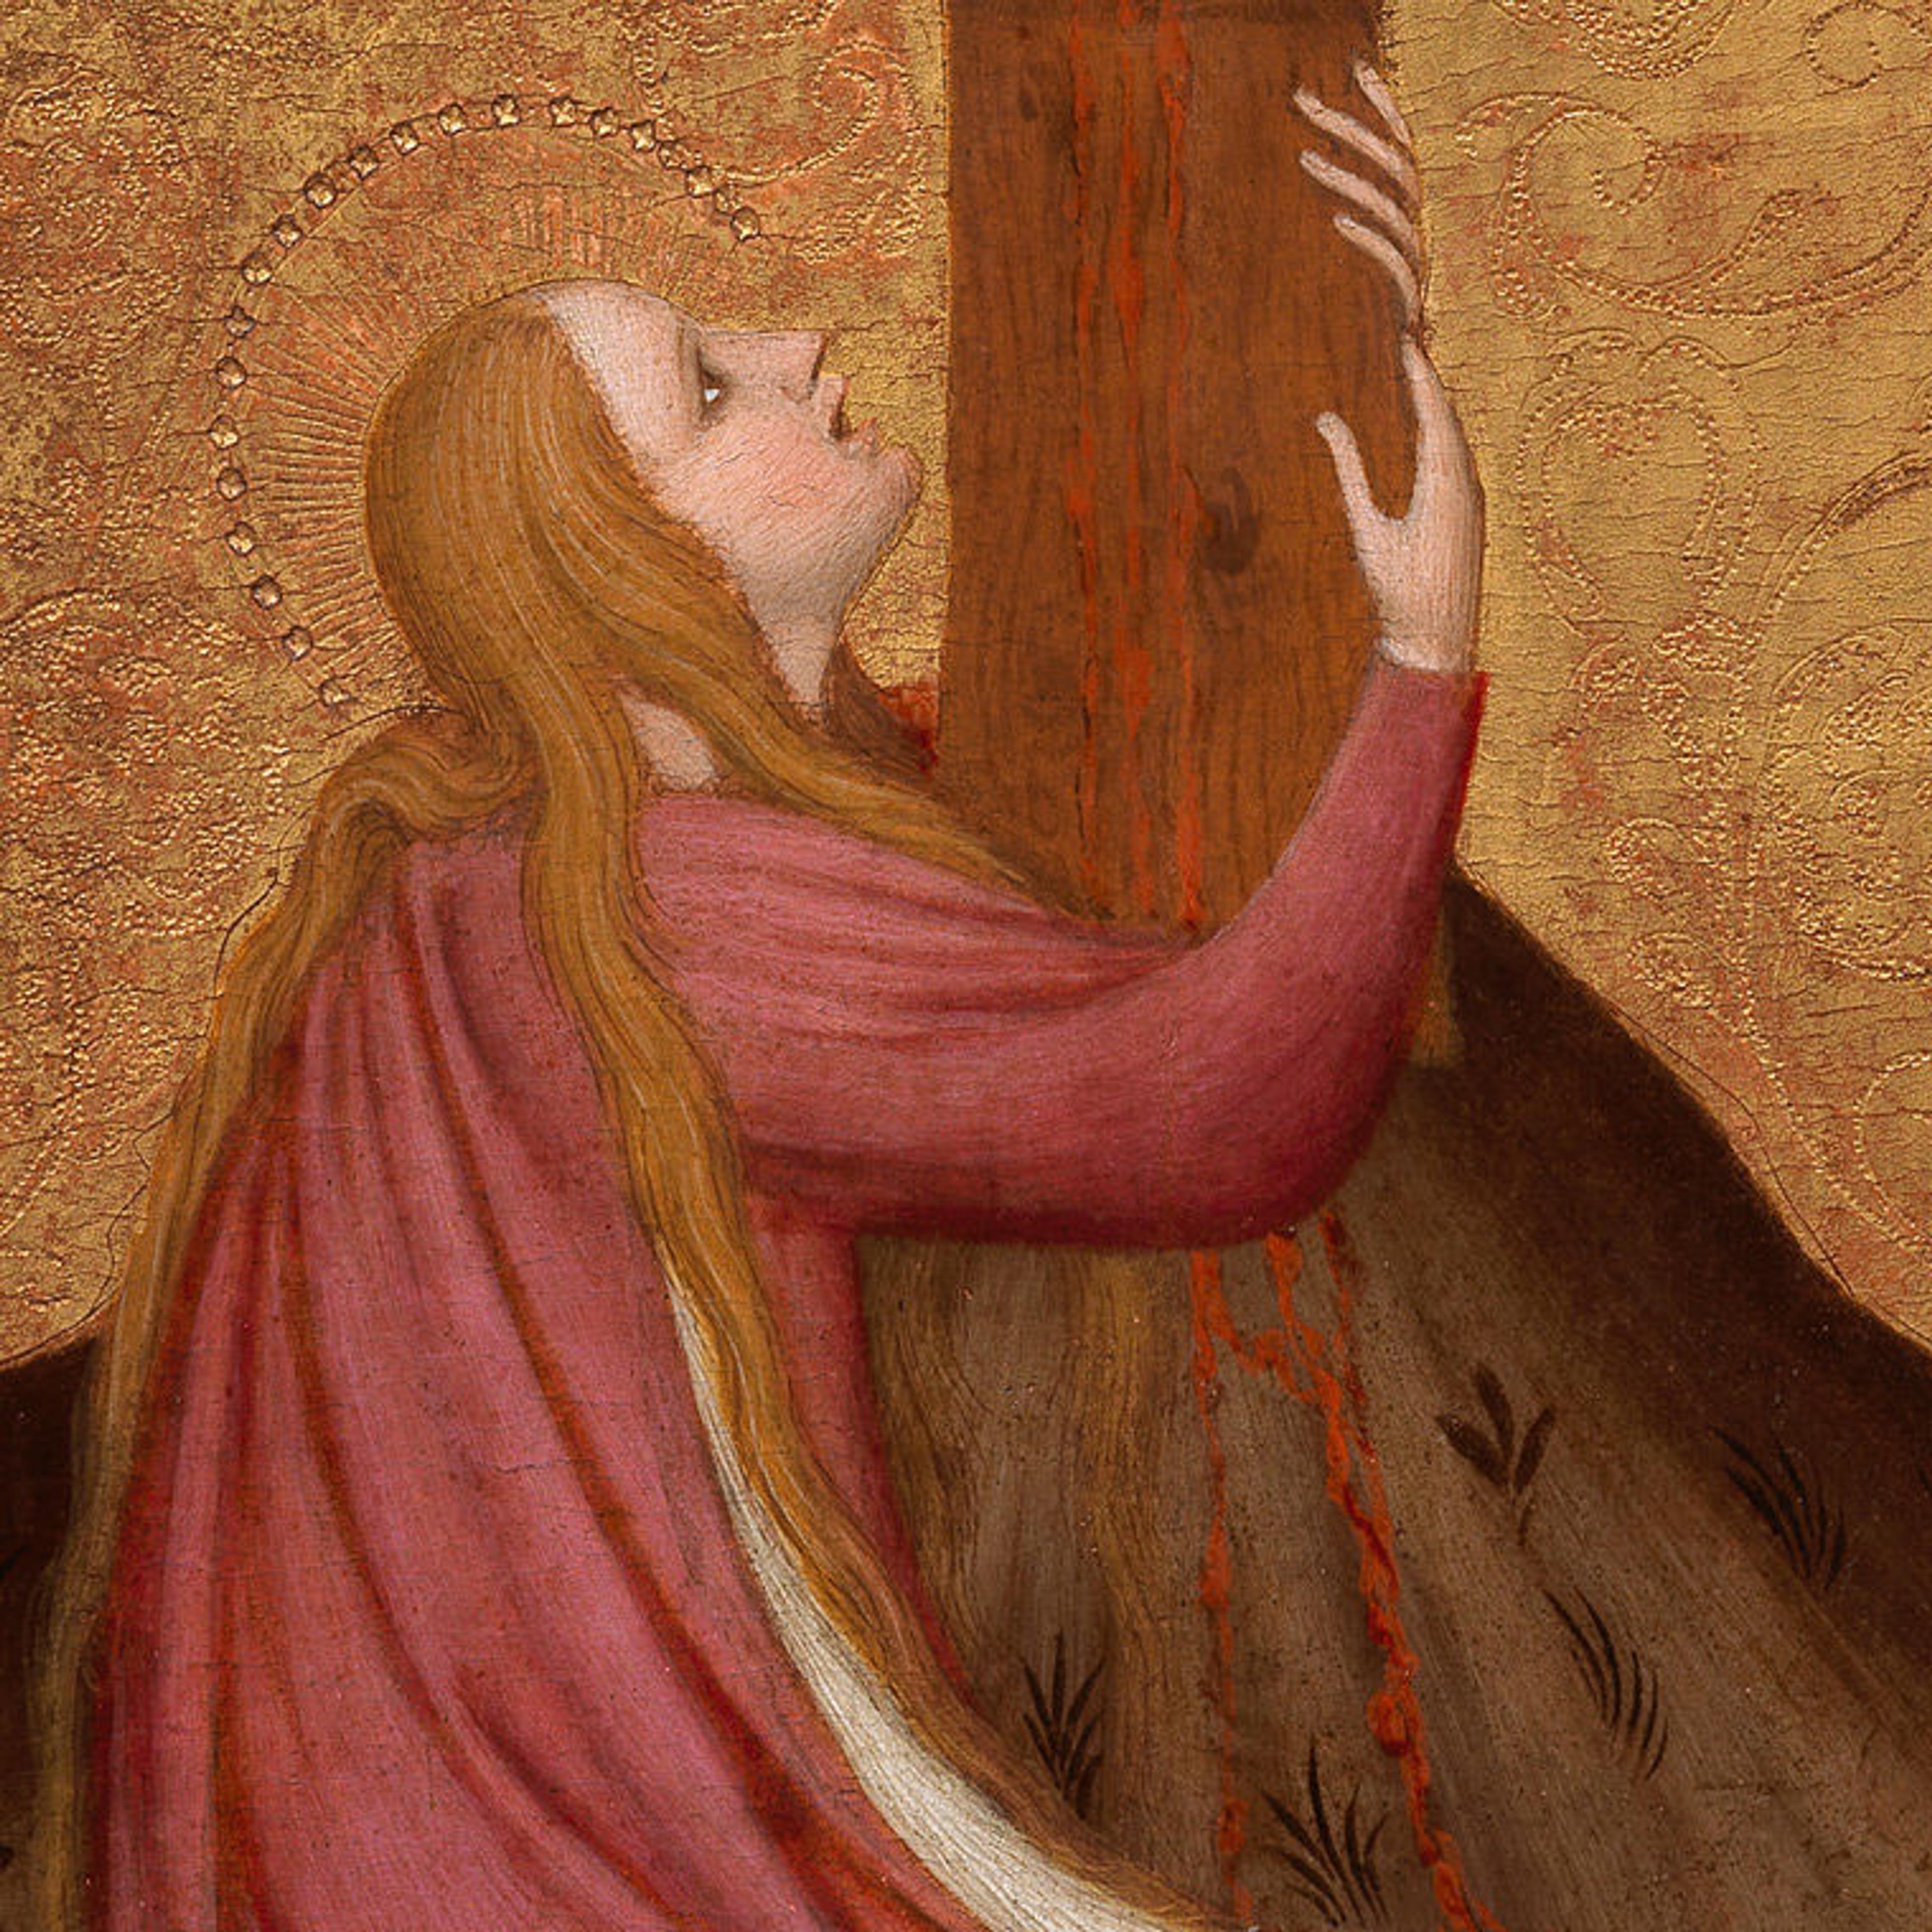 Detail view of Mary Magadalene weeping at the base of the cross, which is streaked in bright red blood